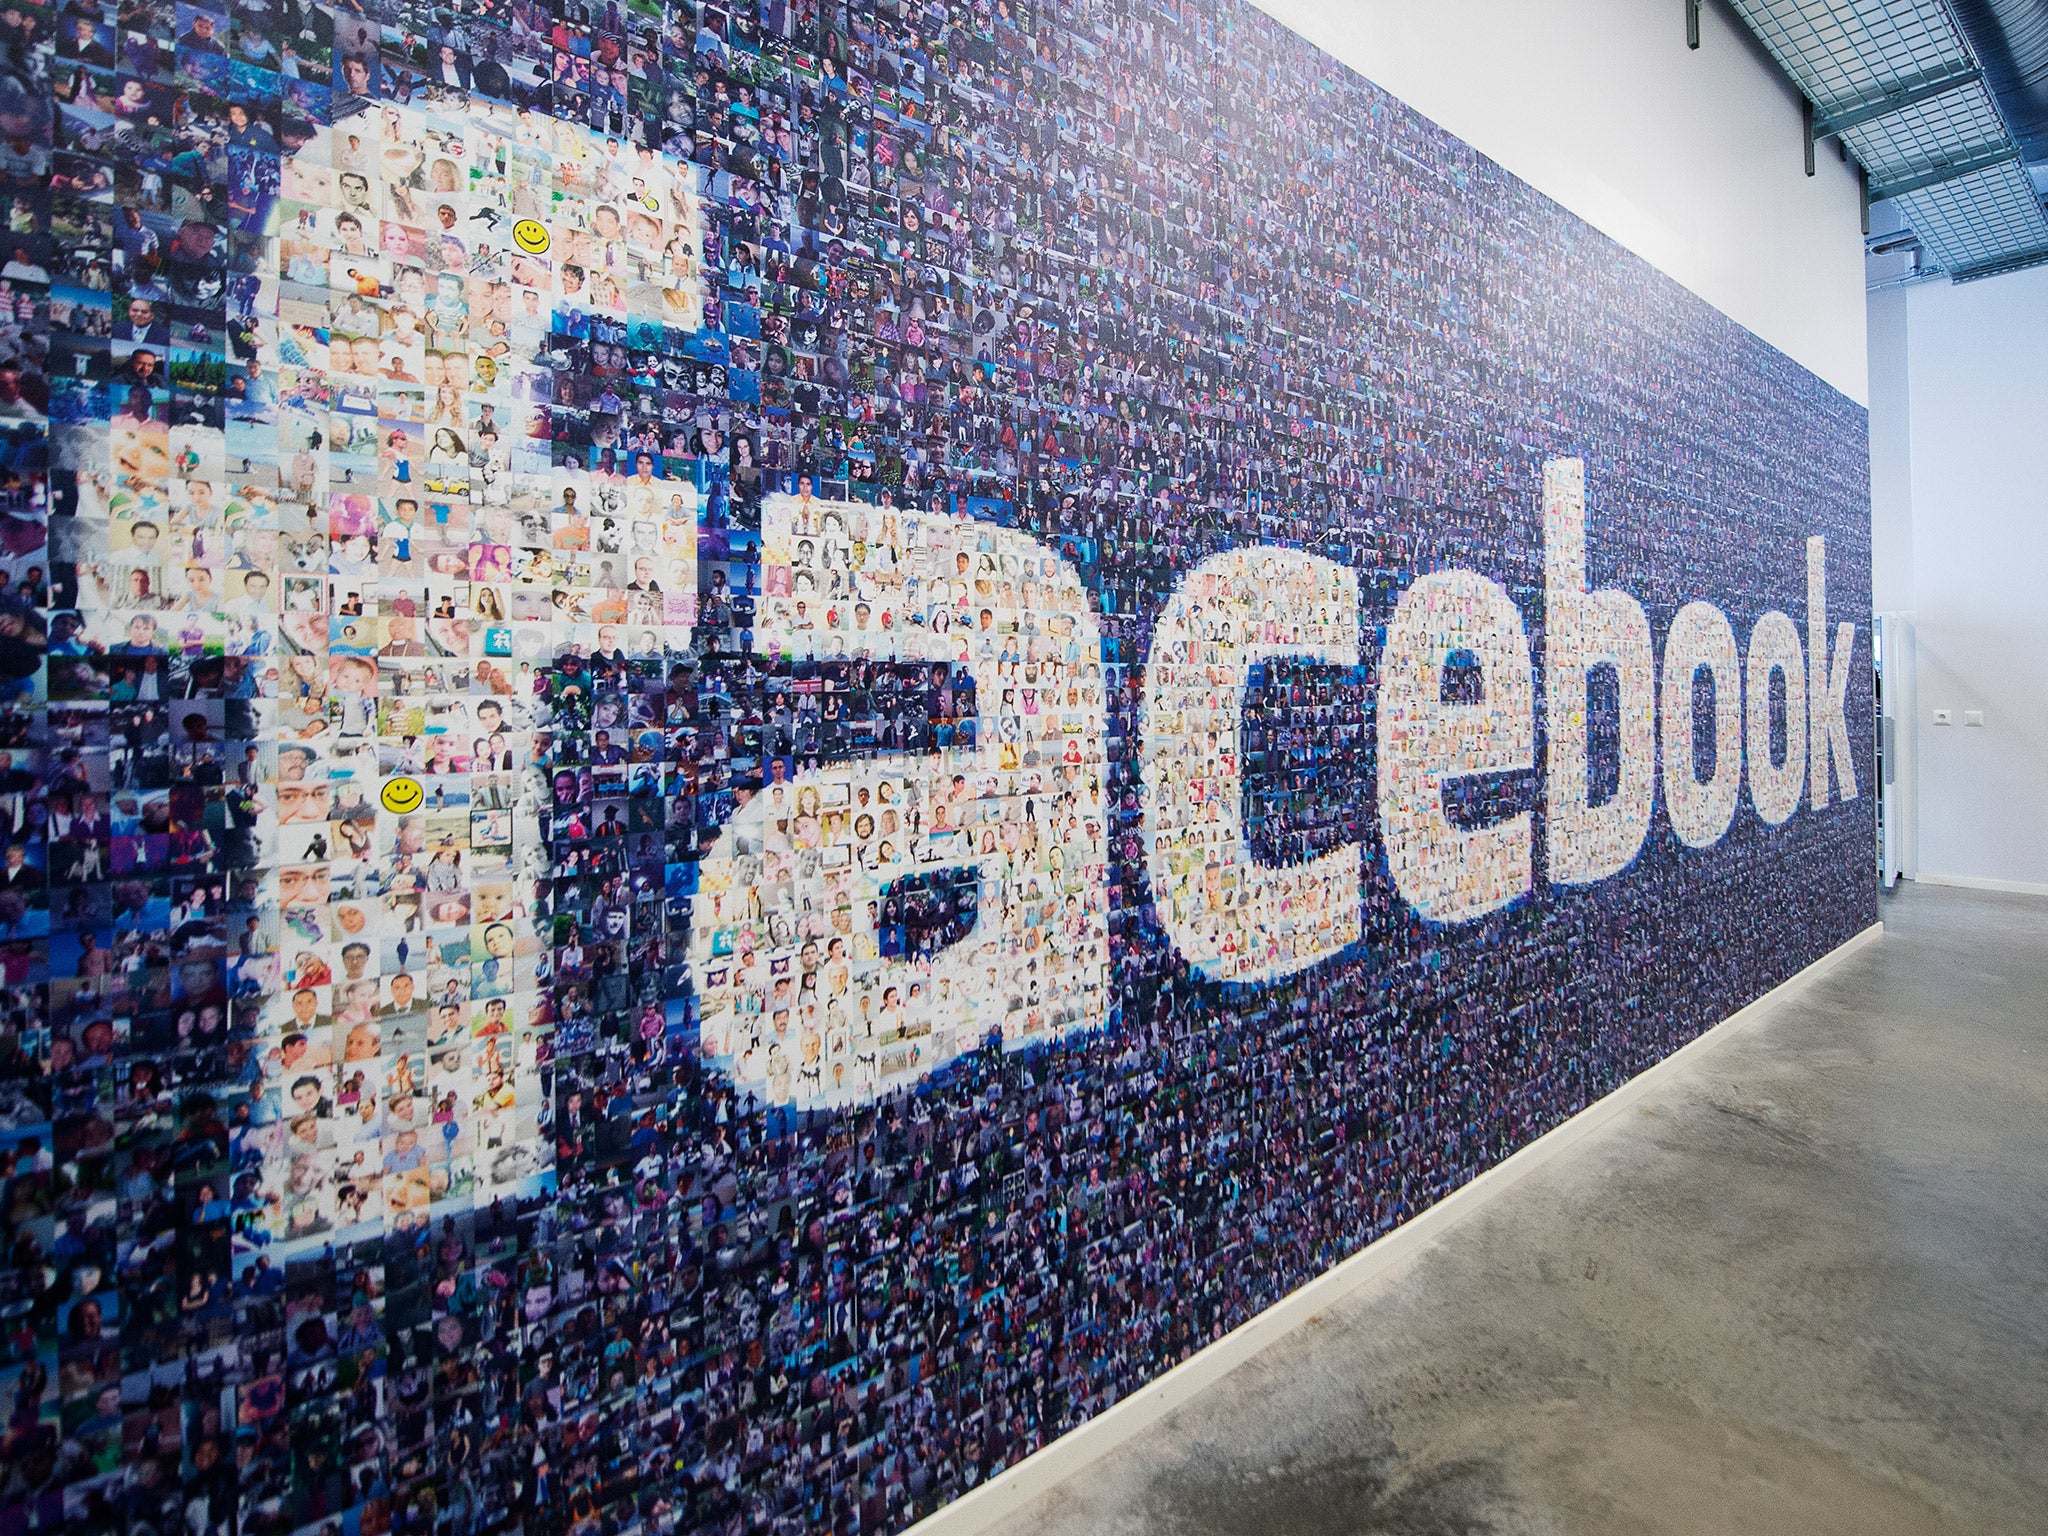 Facebook ran into controversy when it conducted a psychology experiment on nearly 700,000 users without their knowledge